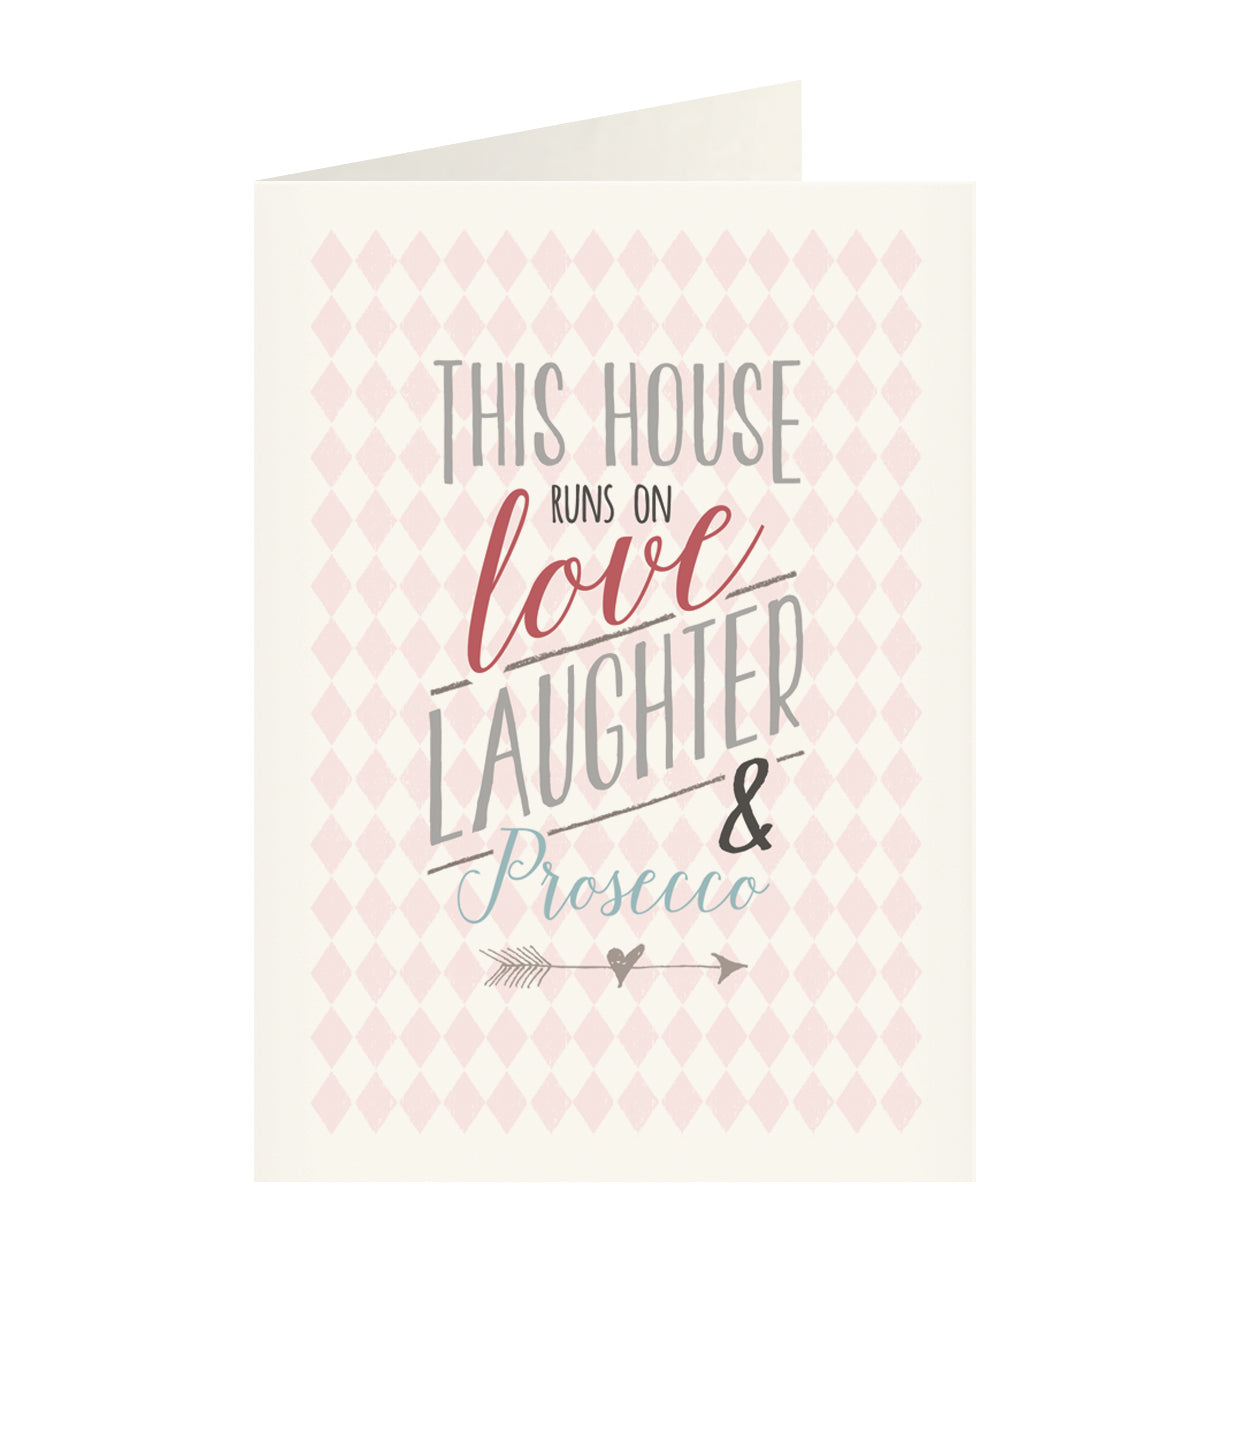 East of India - Just my type greeting card - This house runs on love, laughter & prosecco